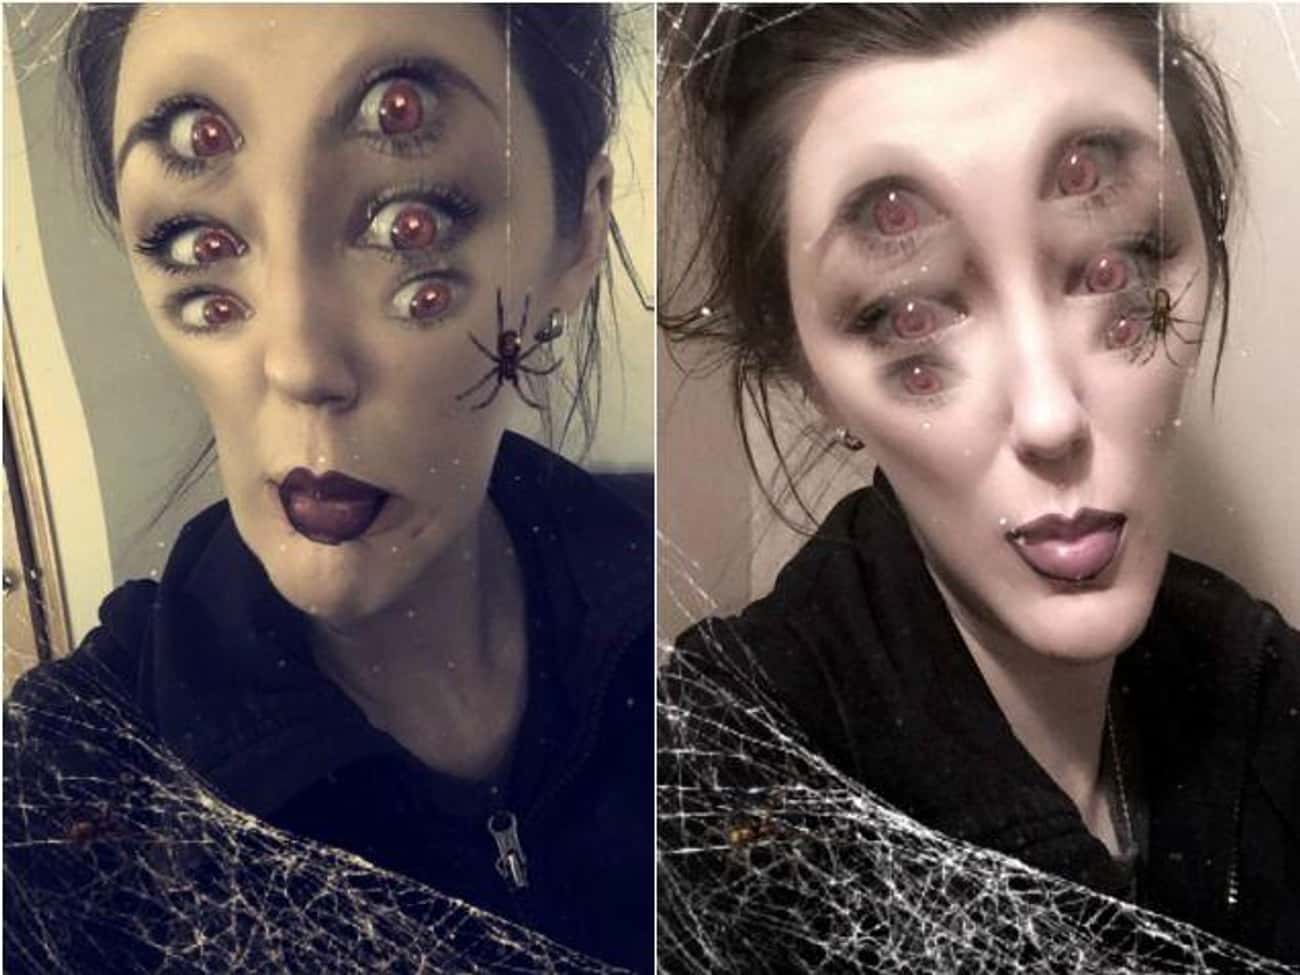 Spider Girl Will Haunt Your Dreams